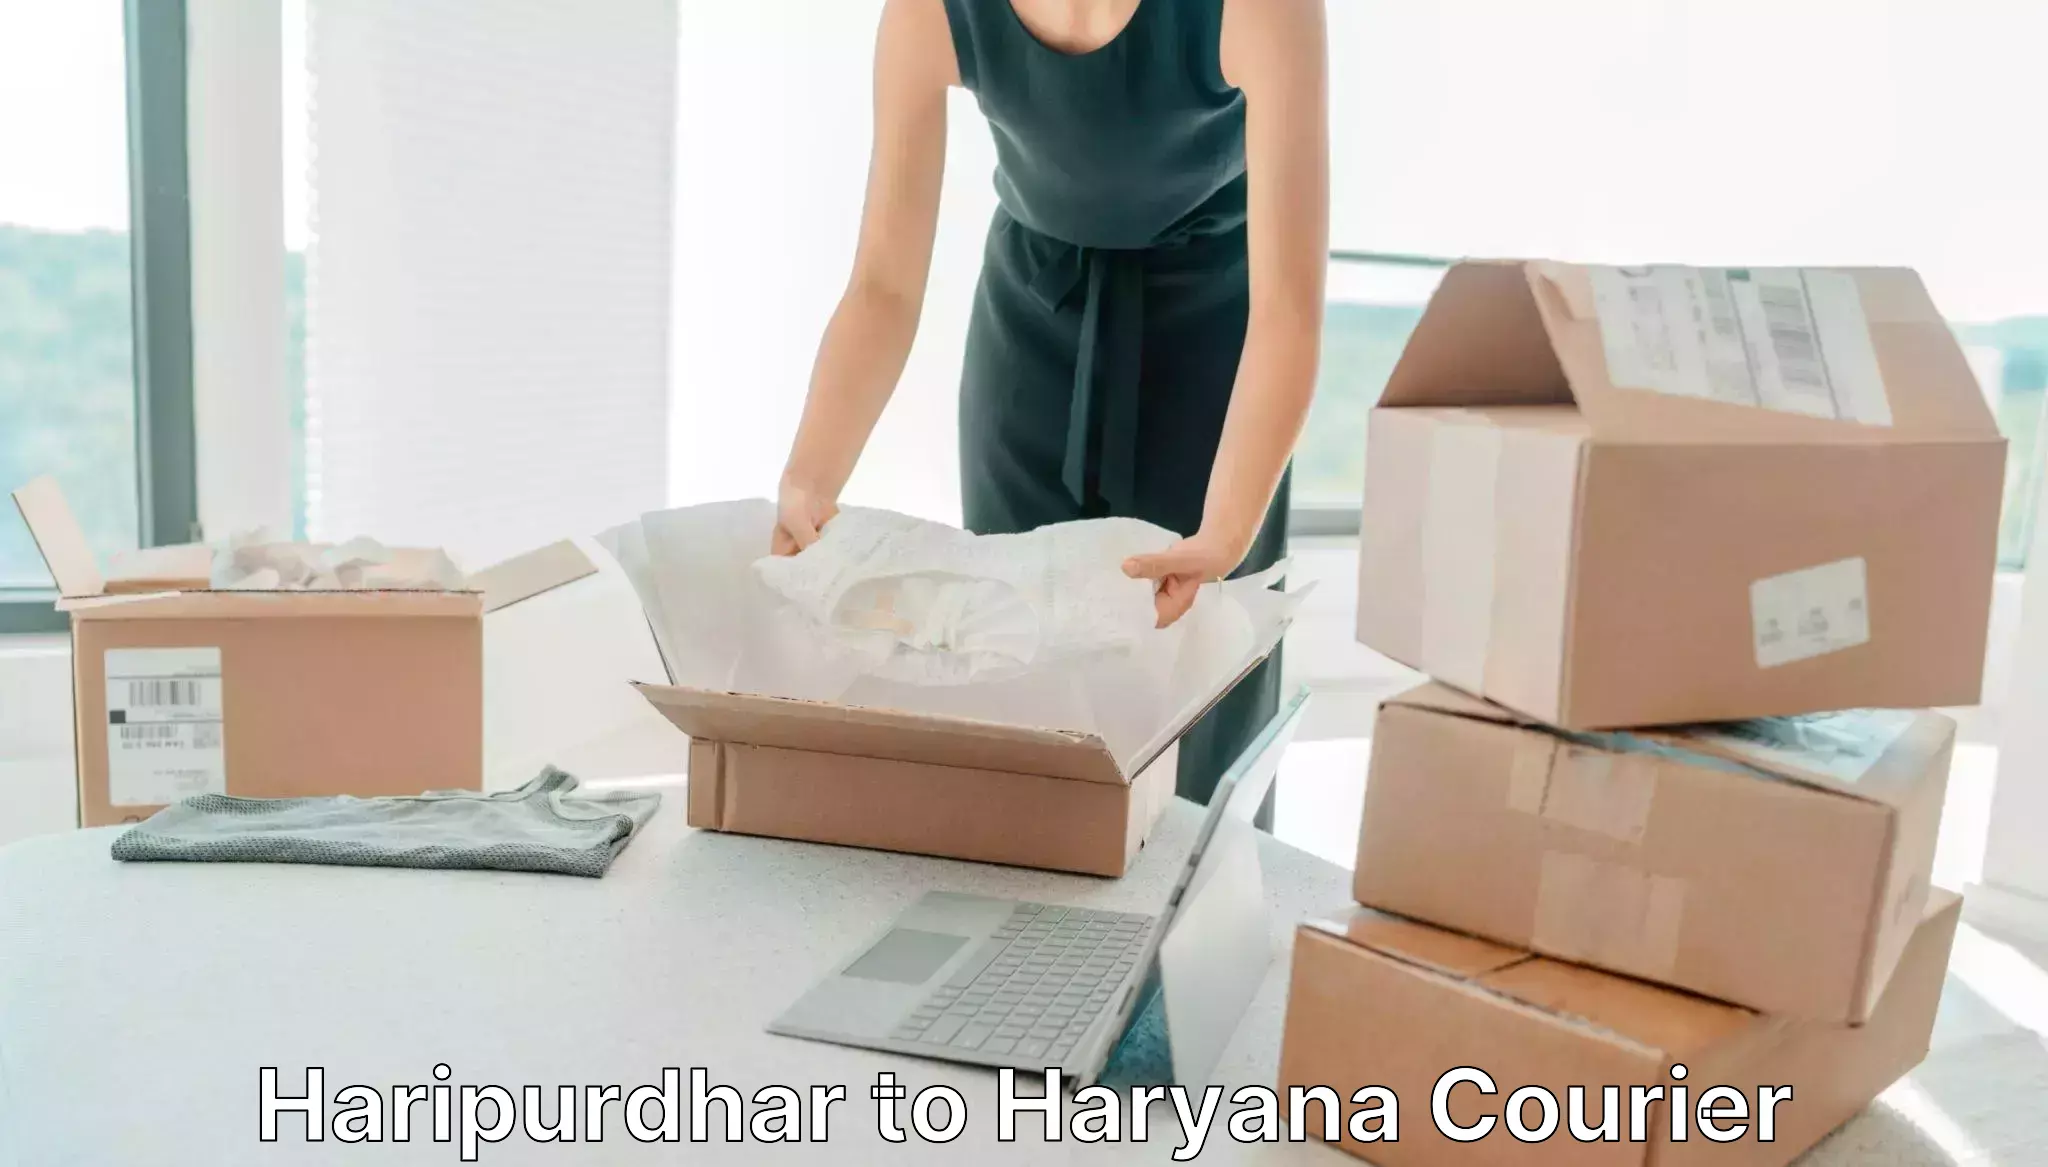 On-call courier service Haripurdhar to NCR Haryana